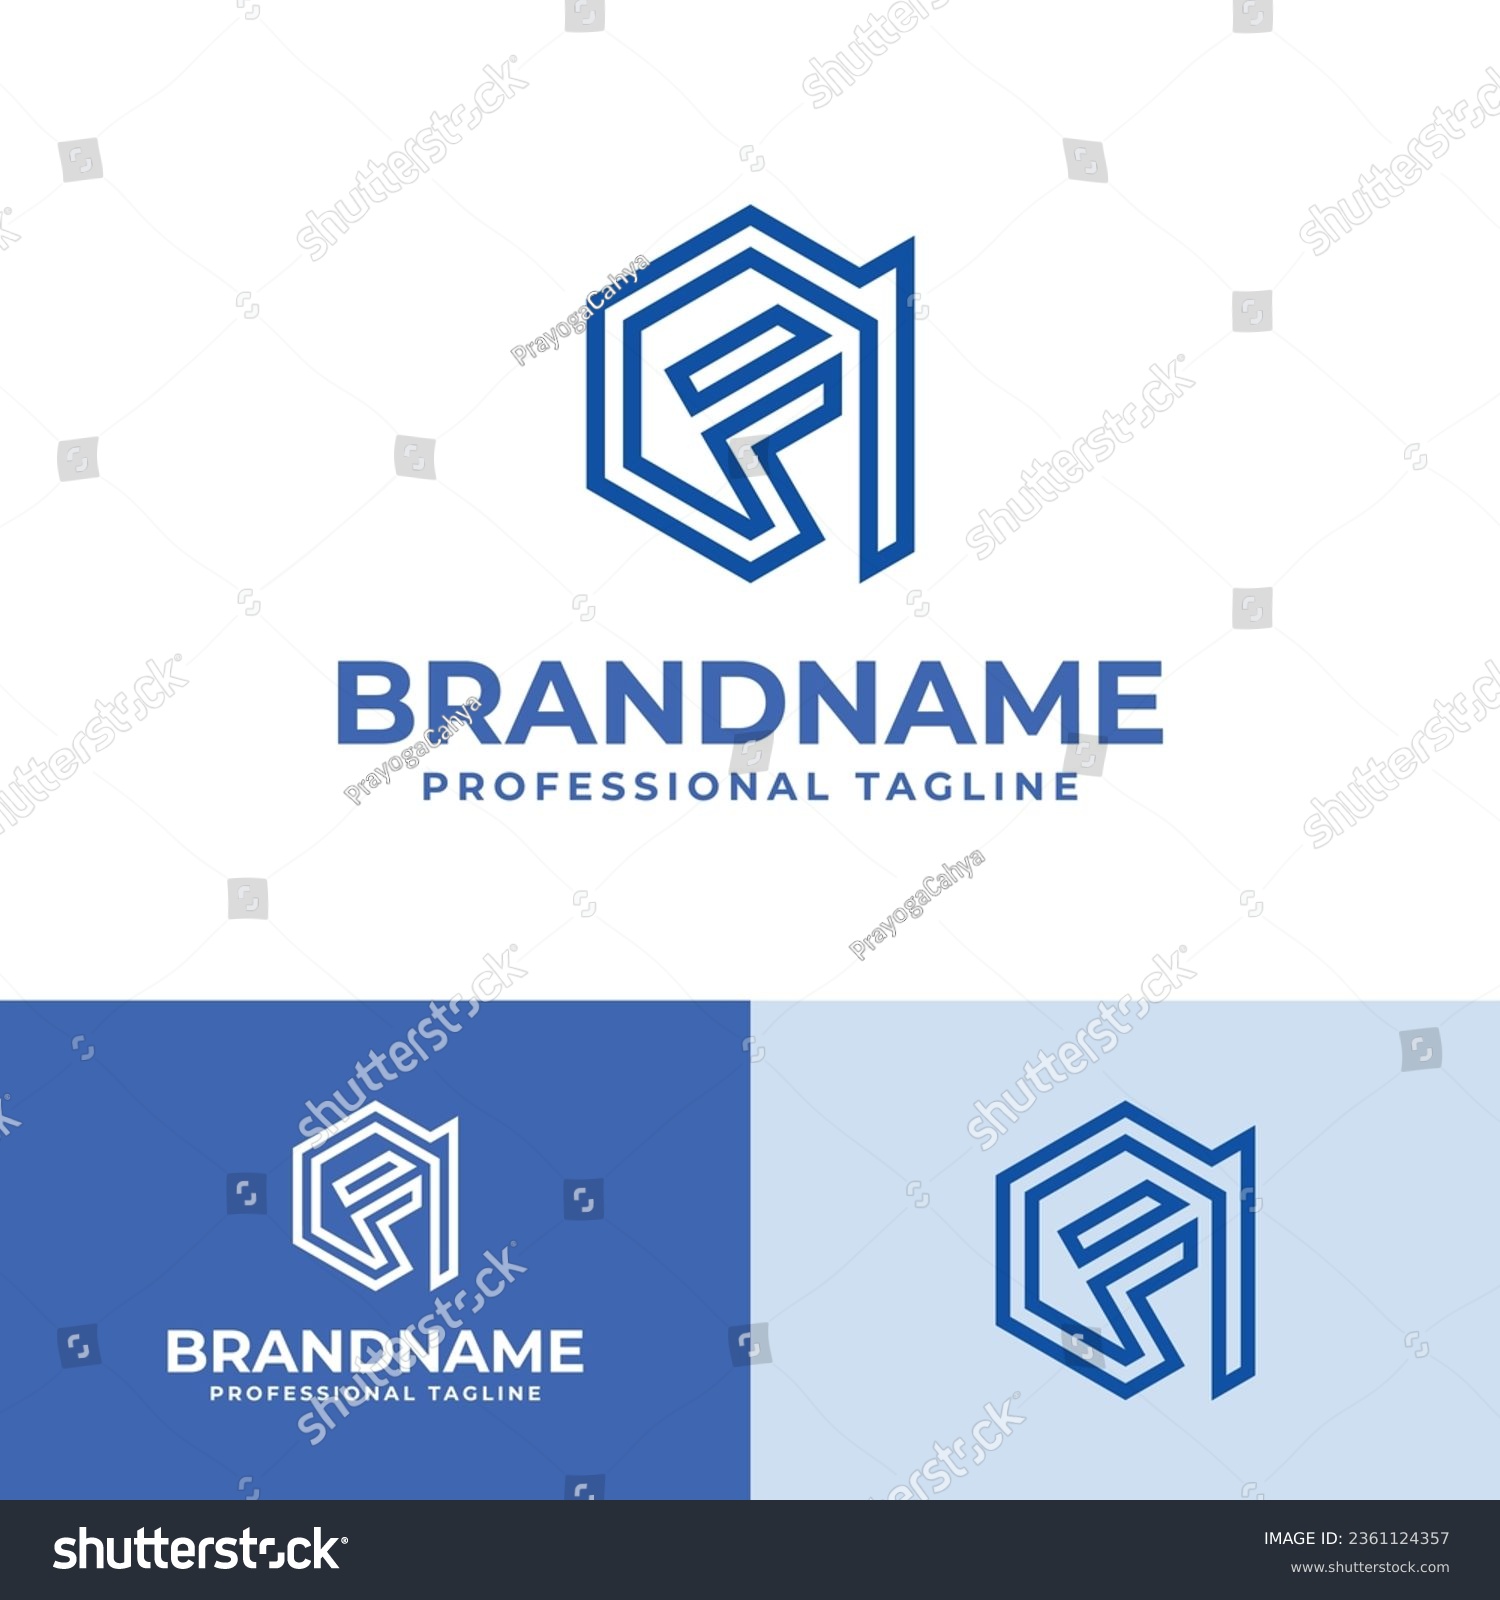 SVG of Letter AF Arrow Hexagonal Logo, suitable for any business related to Hexagonal with AF or FA initial. svg